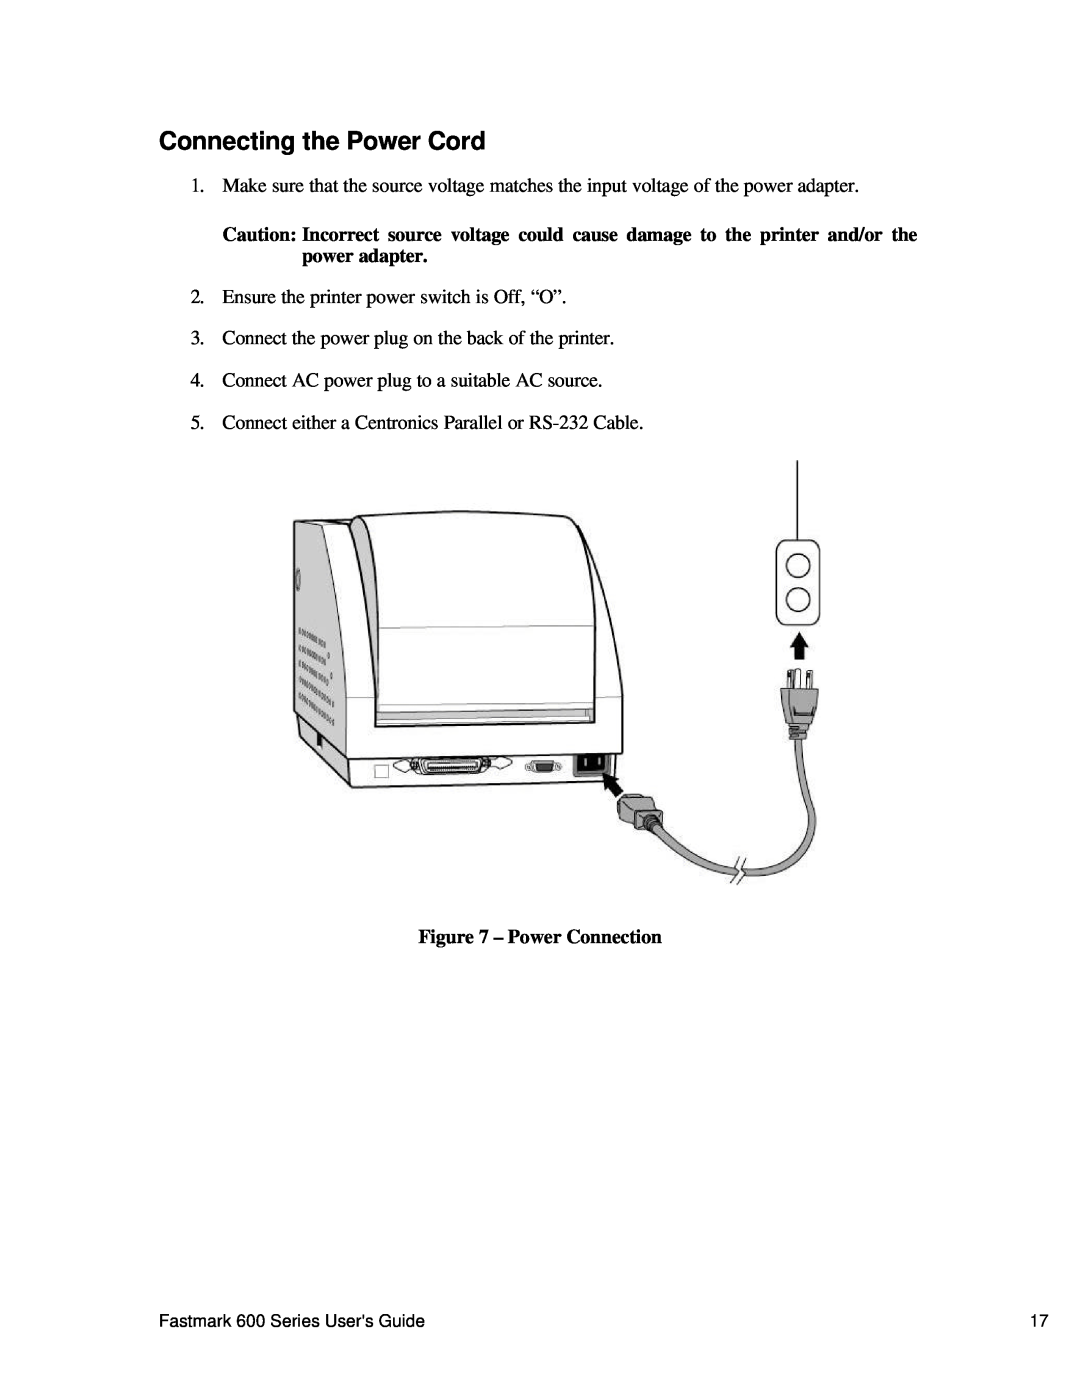 AMT Datasouth 600 manual Connecting the Power Cord, Power Connection 